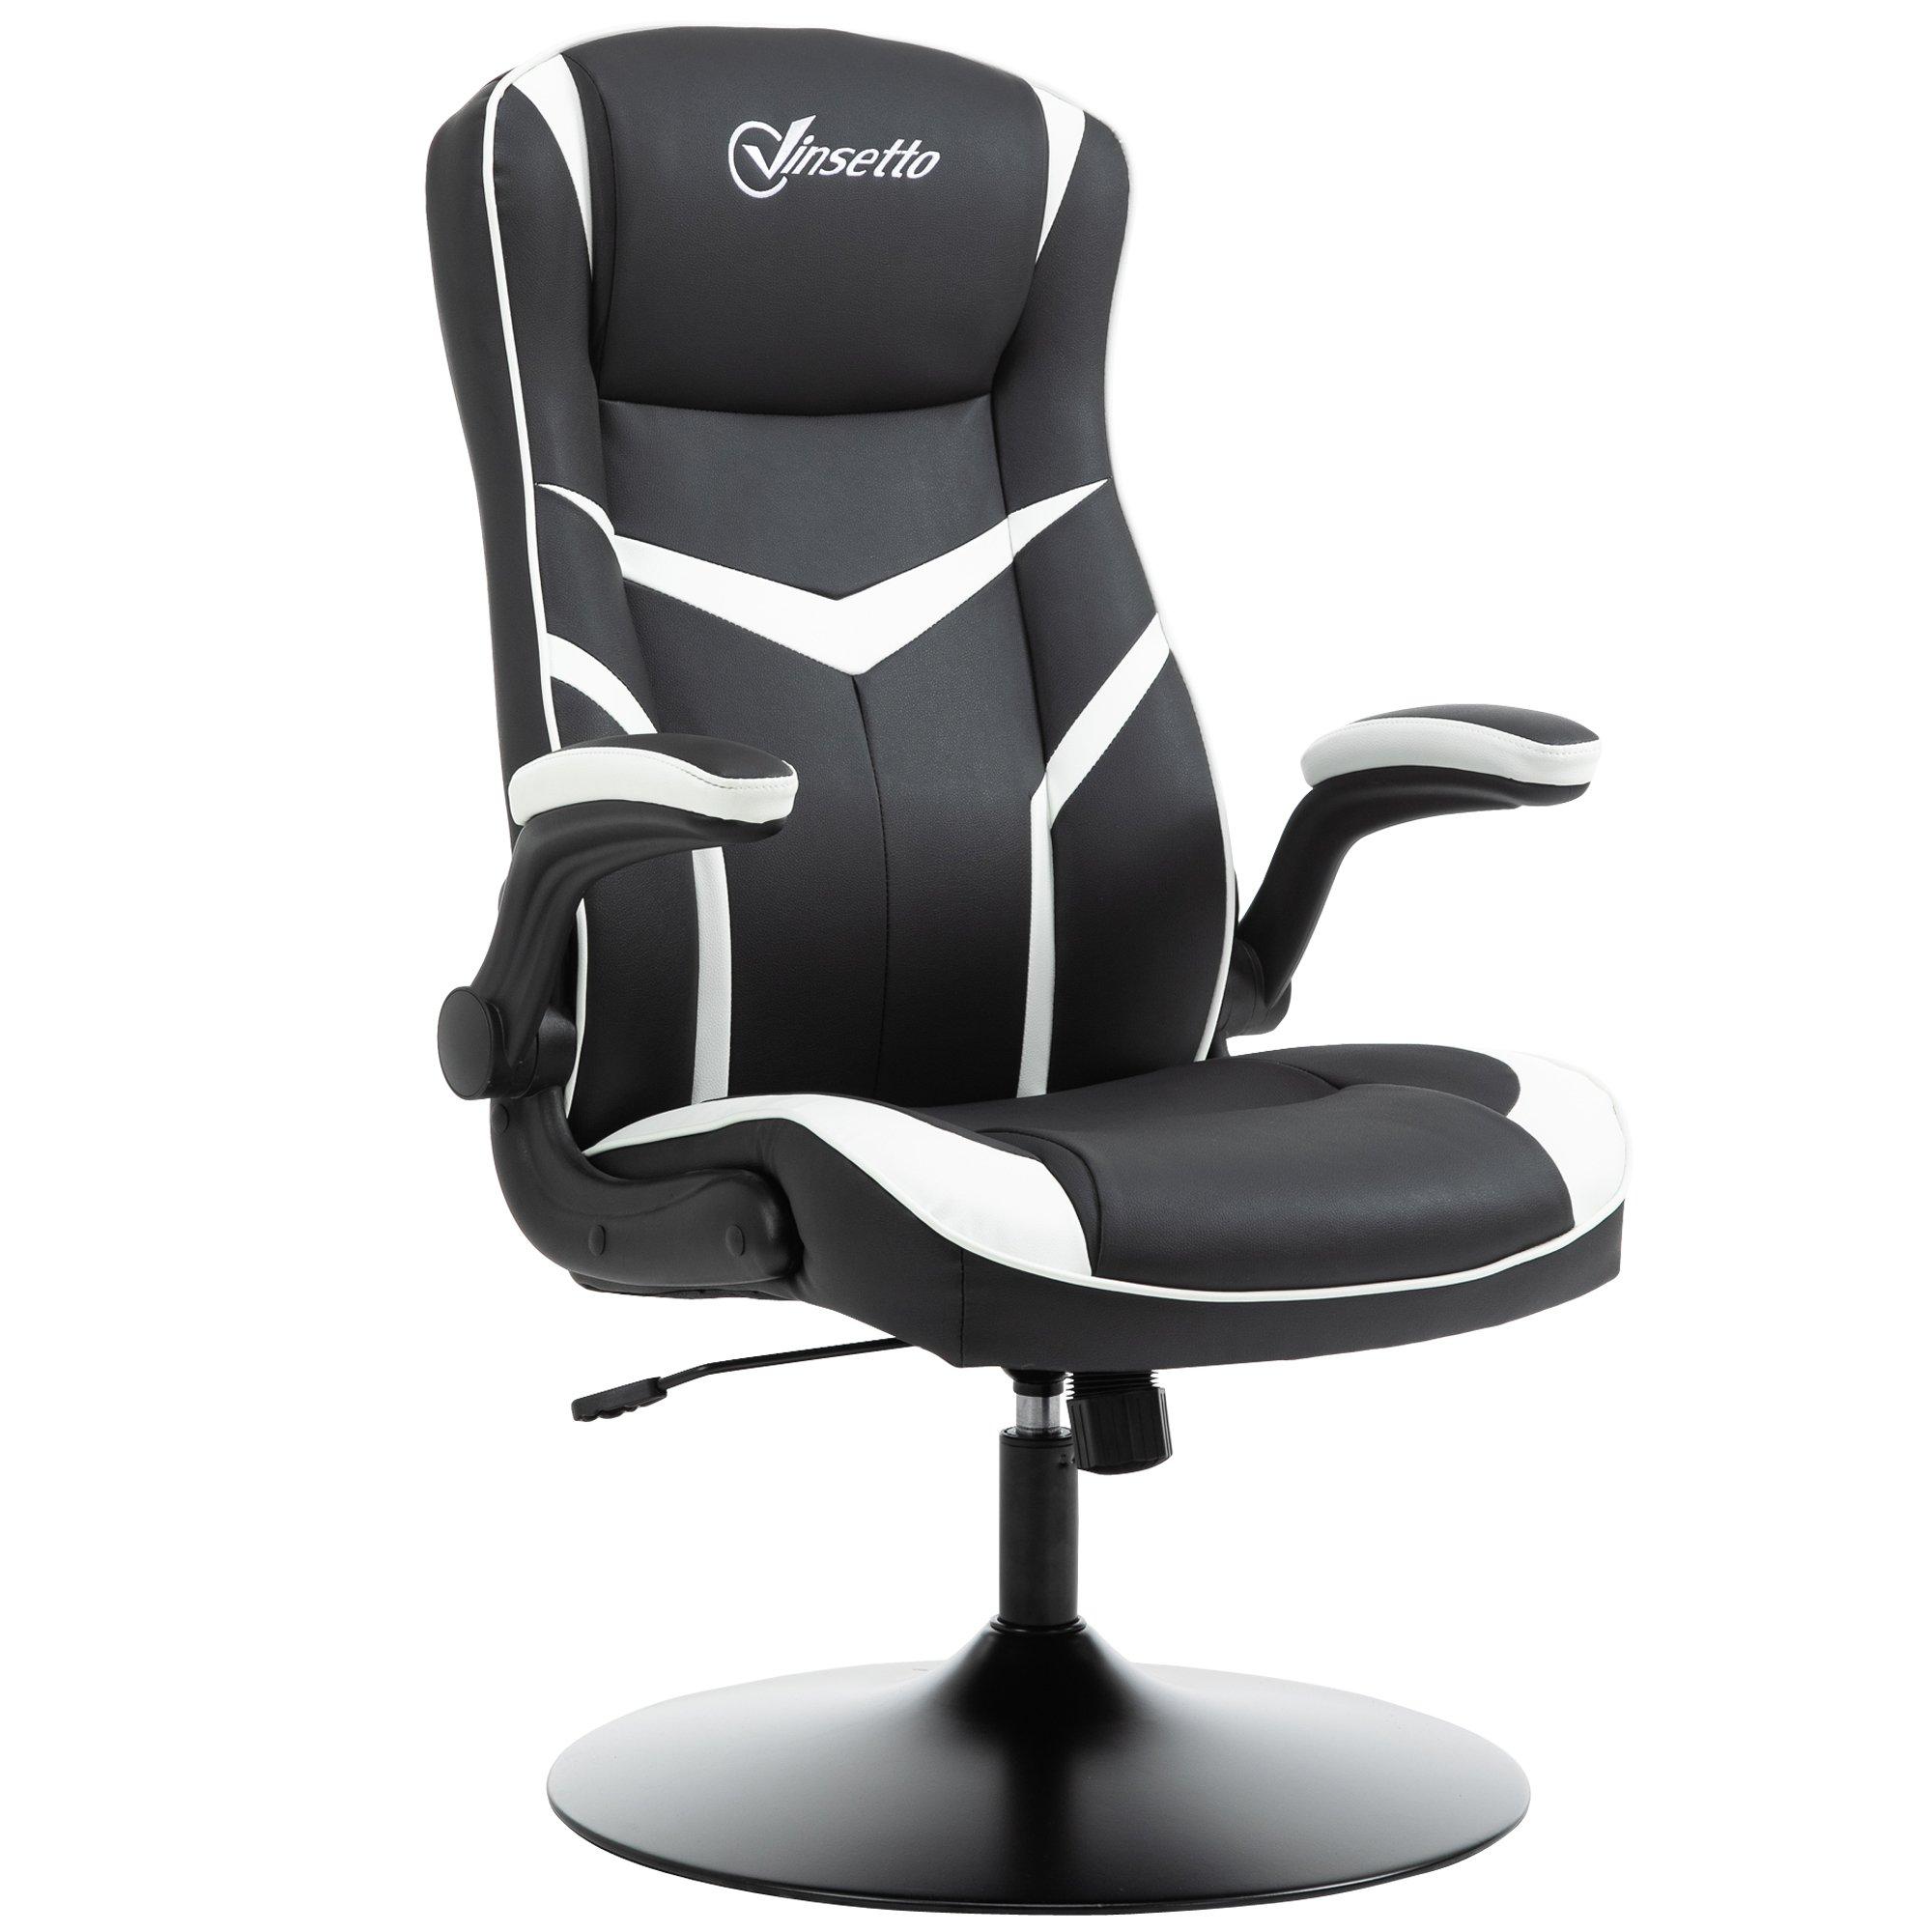 High Back Computer Gaming Chair Video Game Chair with Swivel